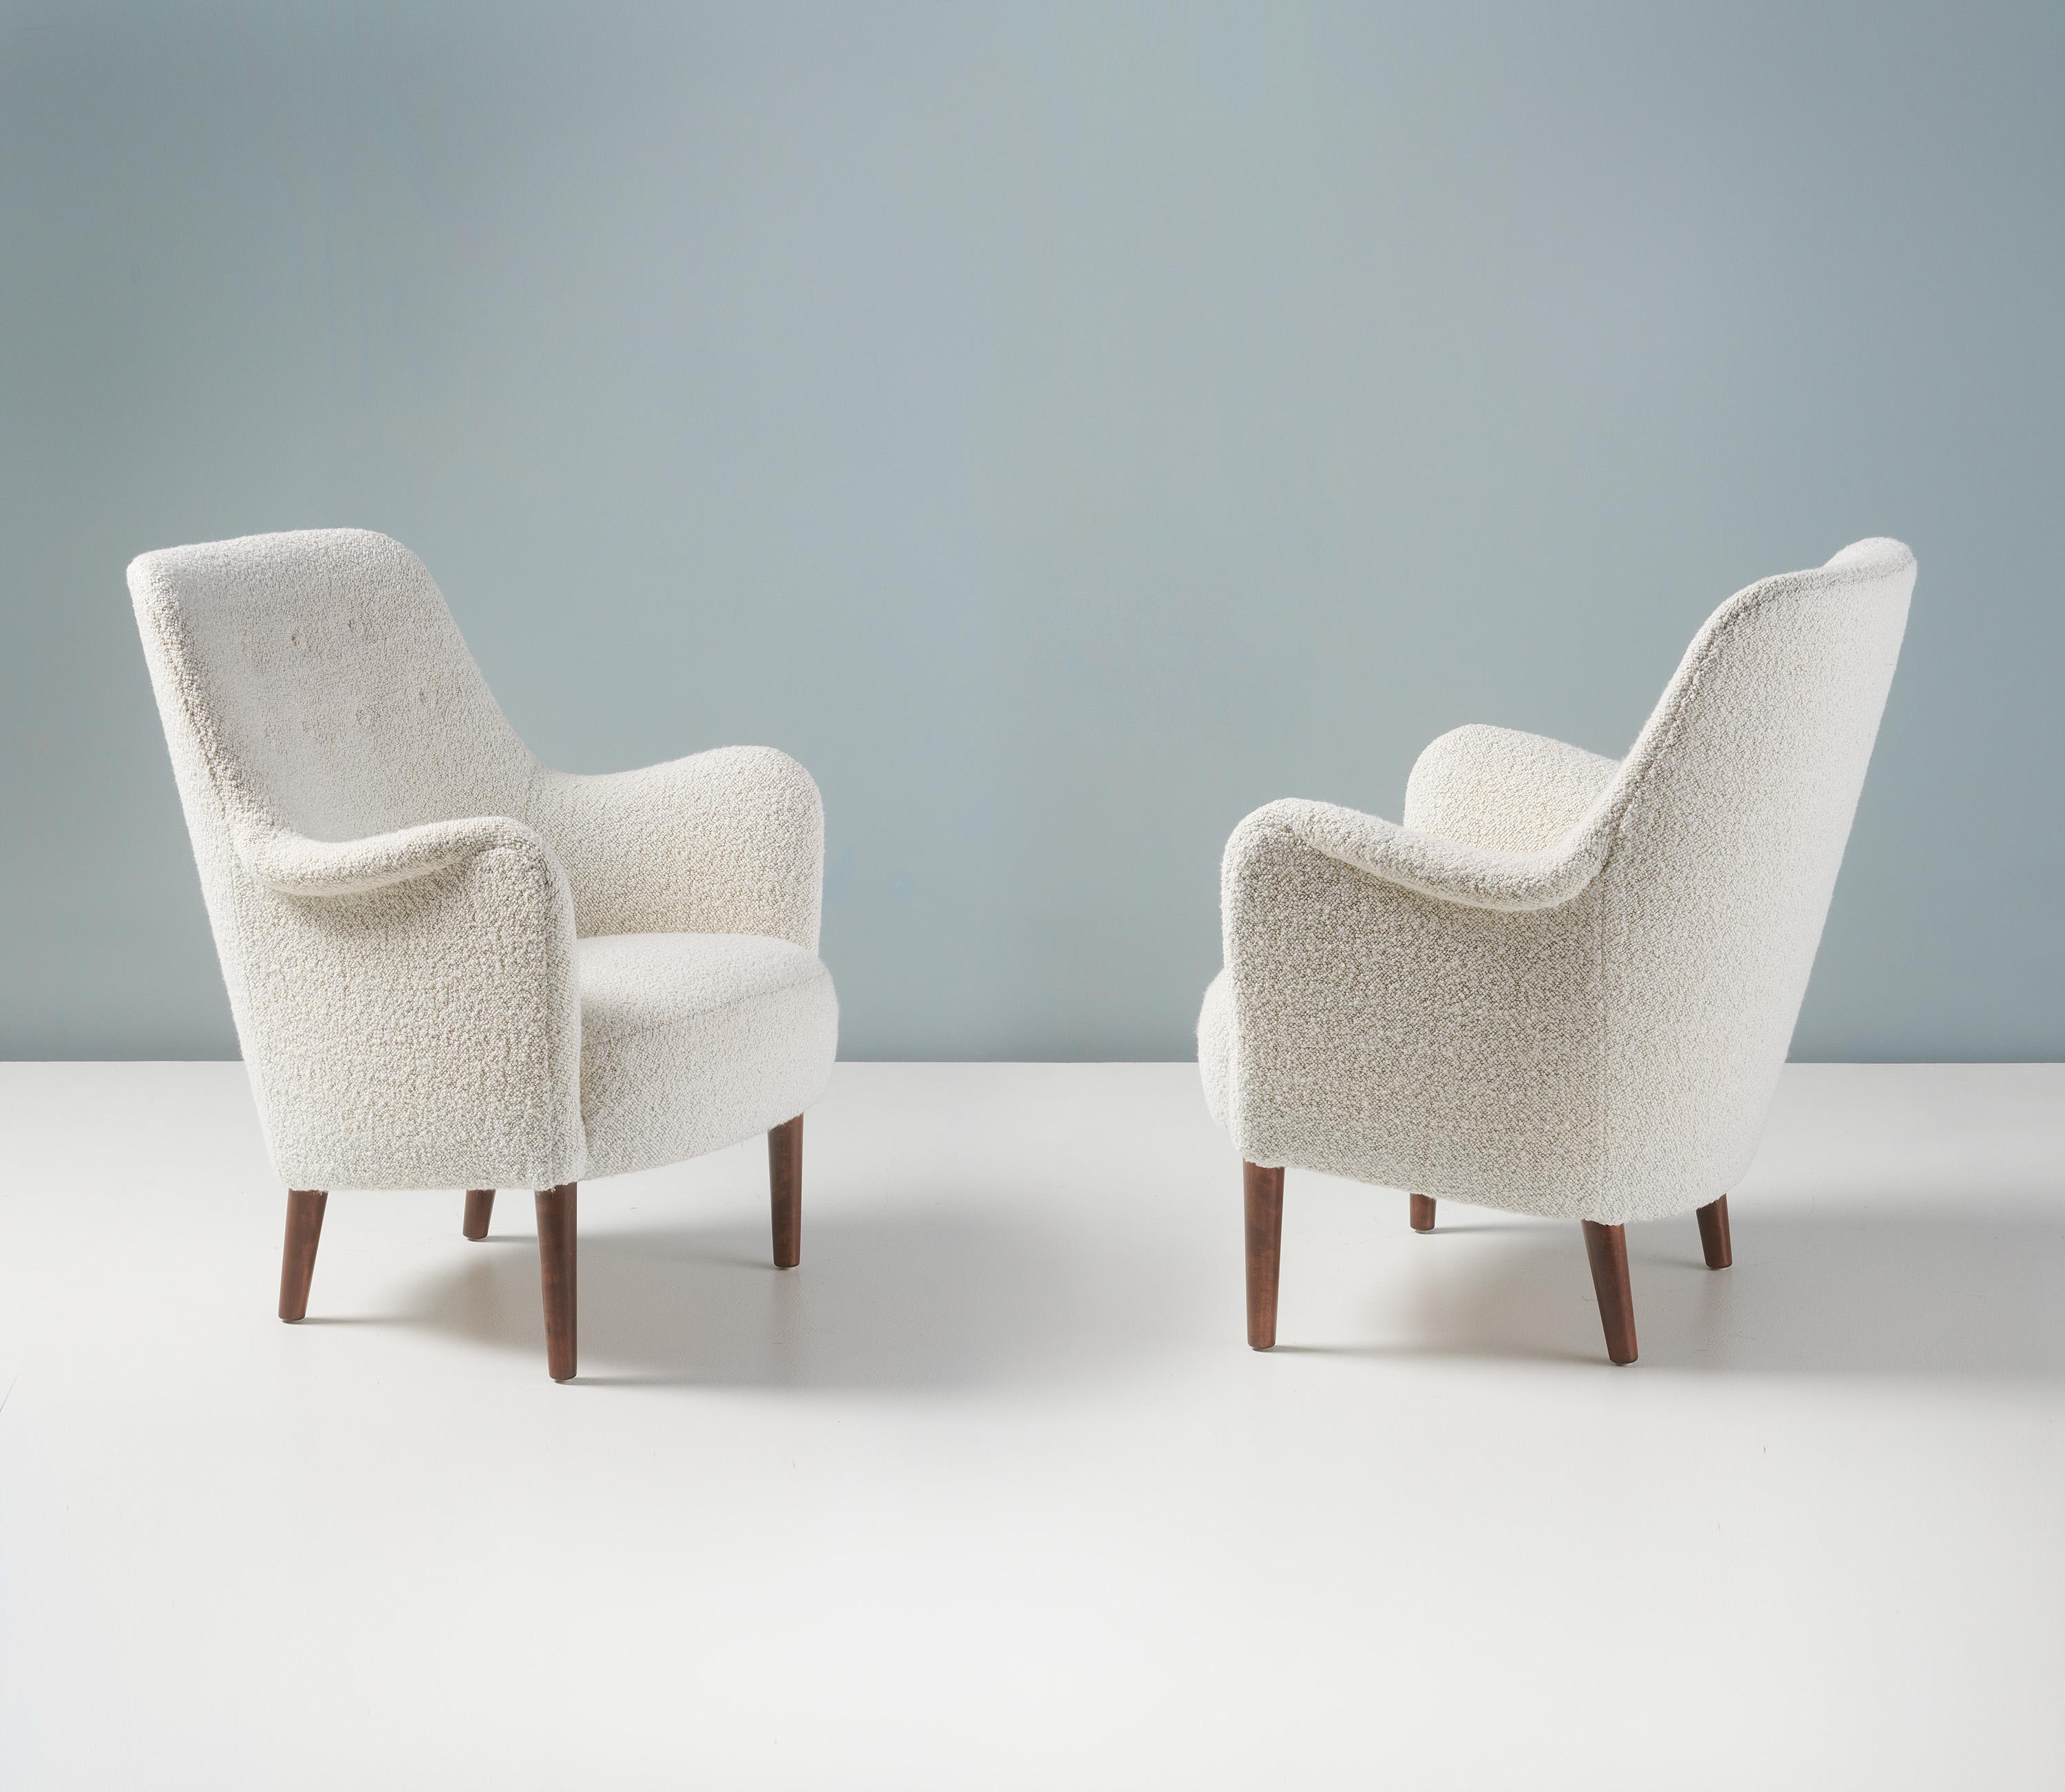 Carl Malmsten Armchairs, circa 1950s

A pair of upholstered armchairs from Swedish master: Carl Malmsten. This model is a lighter variation on the Samsas chair with taller legs. This pair has been reupholstered in Dedar Karakorum ‘Ecume’ fabric.